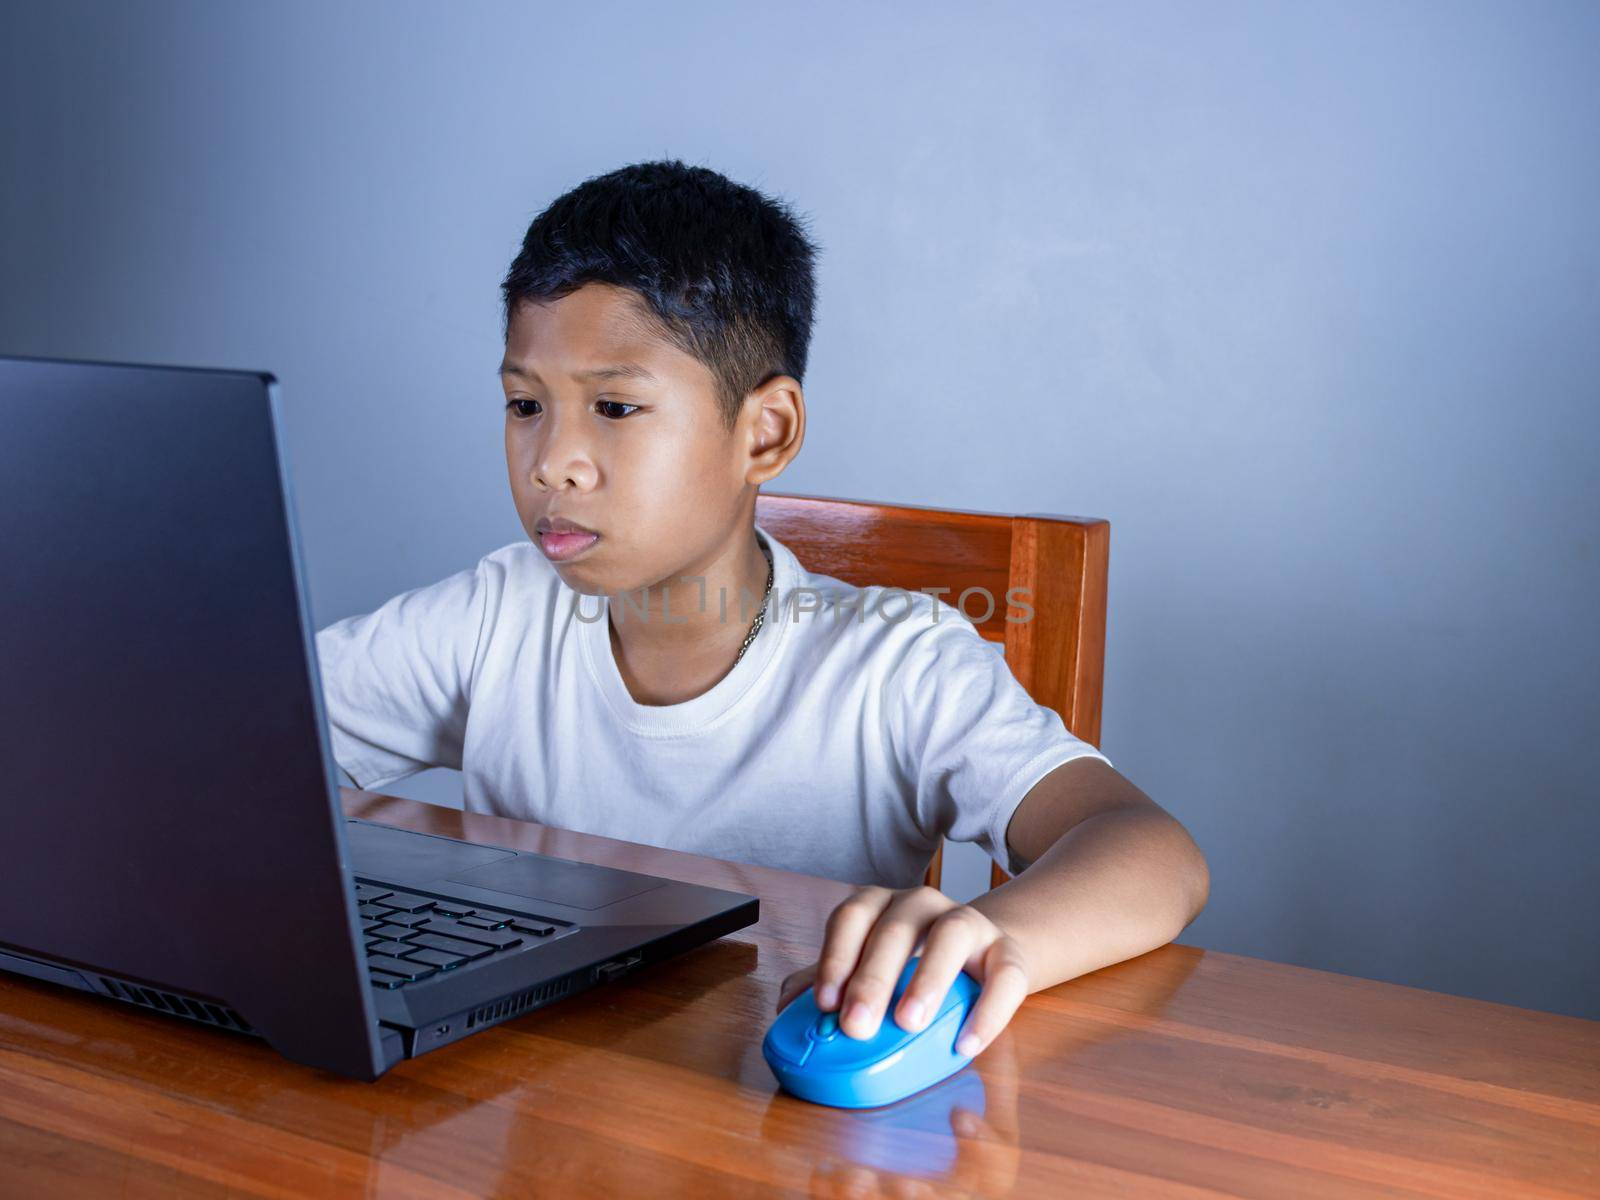 Close up The boy sits staring at the laptop and his hand is holding the mouse. educational concept, educational information search, copy space